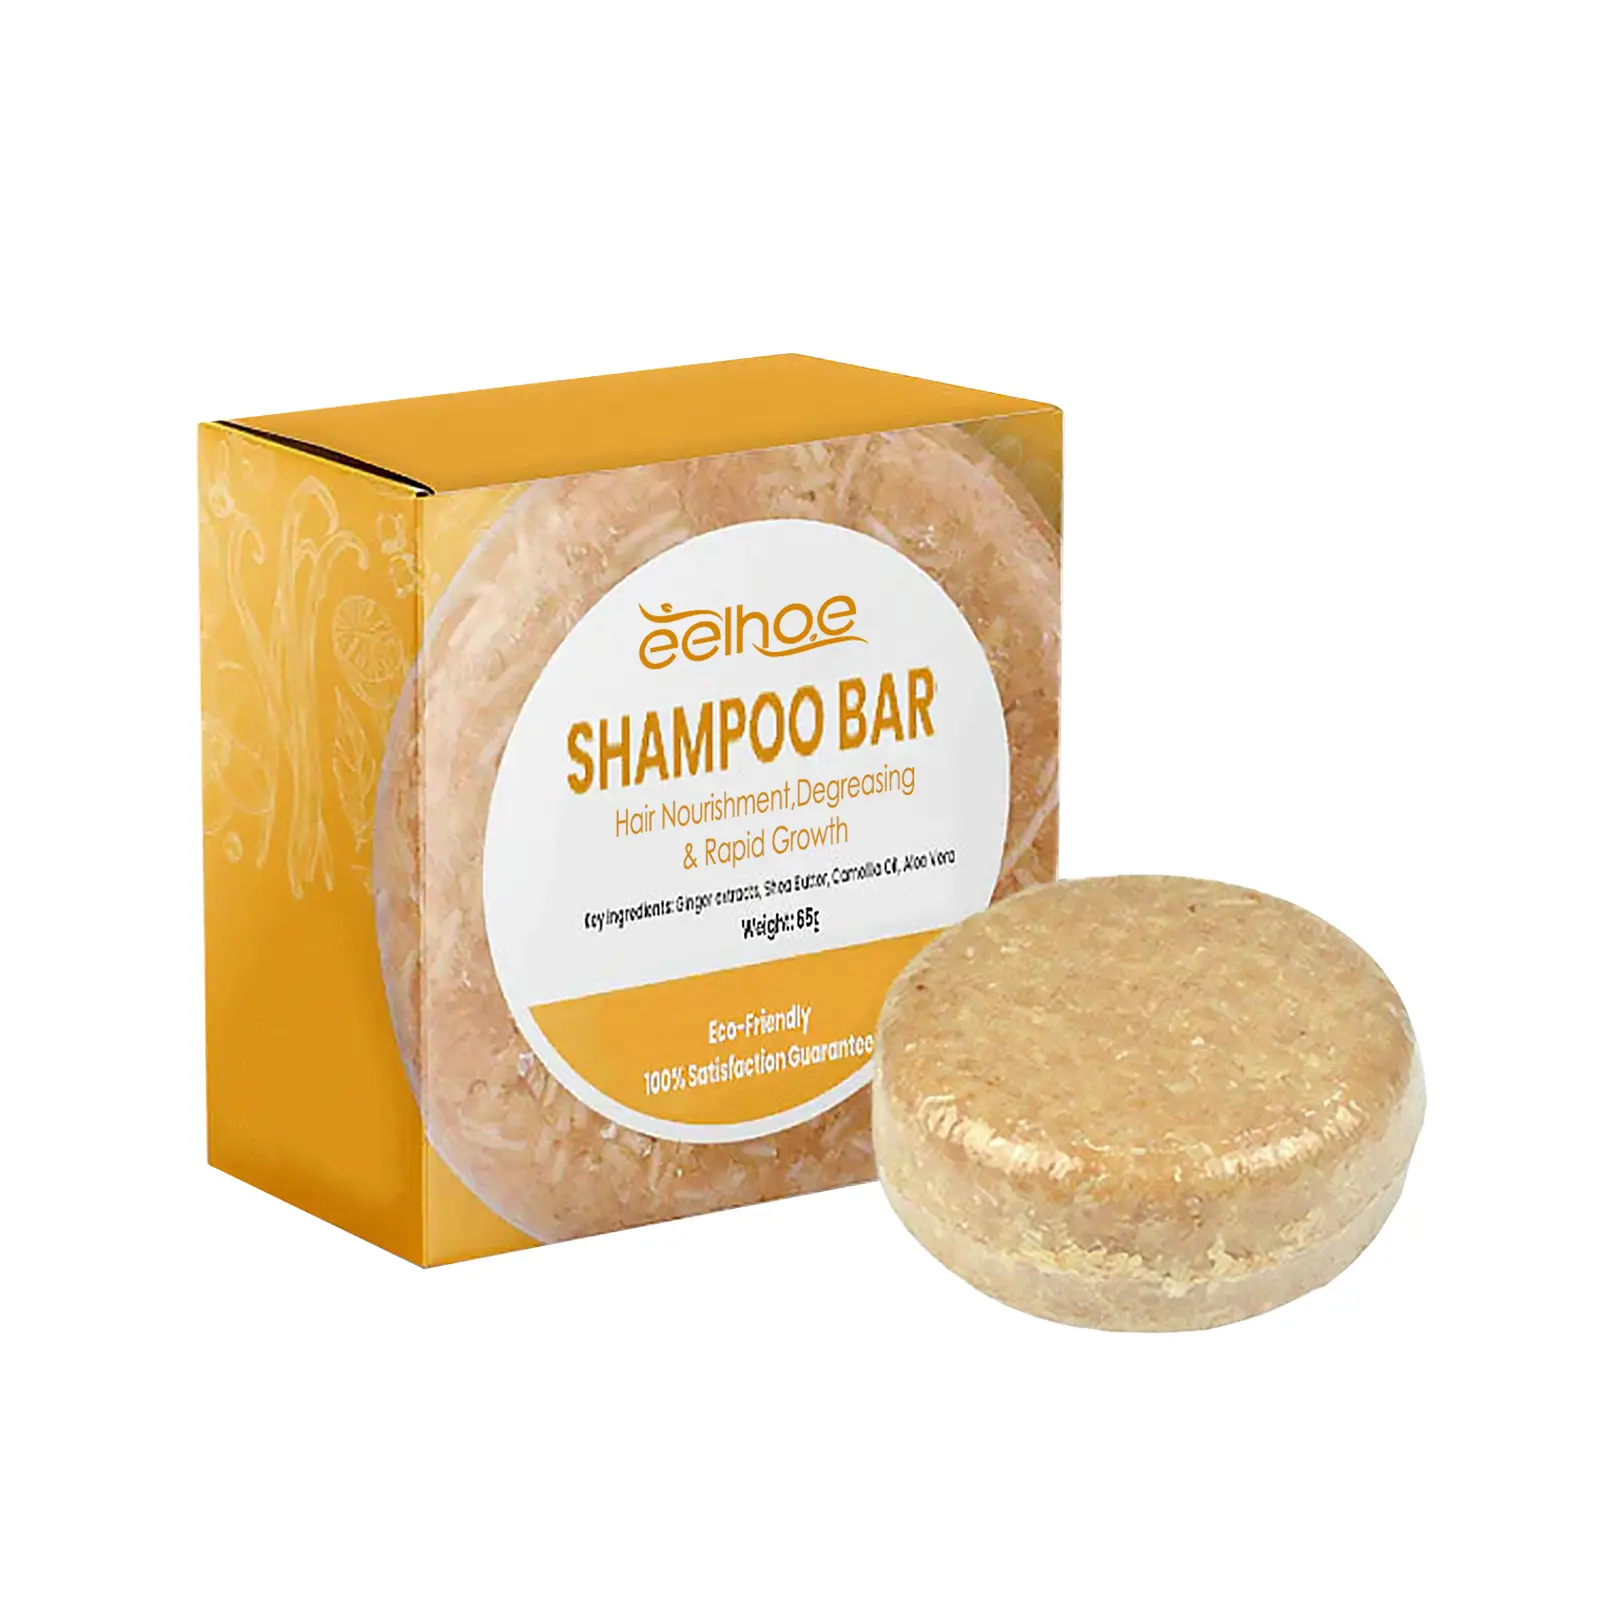 Solid hair, tight hair and anti-loss soft shampoo to repair dry and damaged hair ends